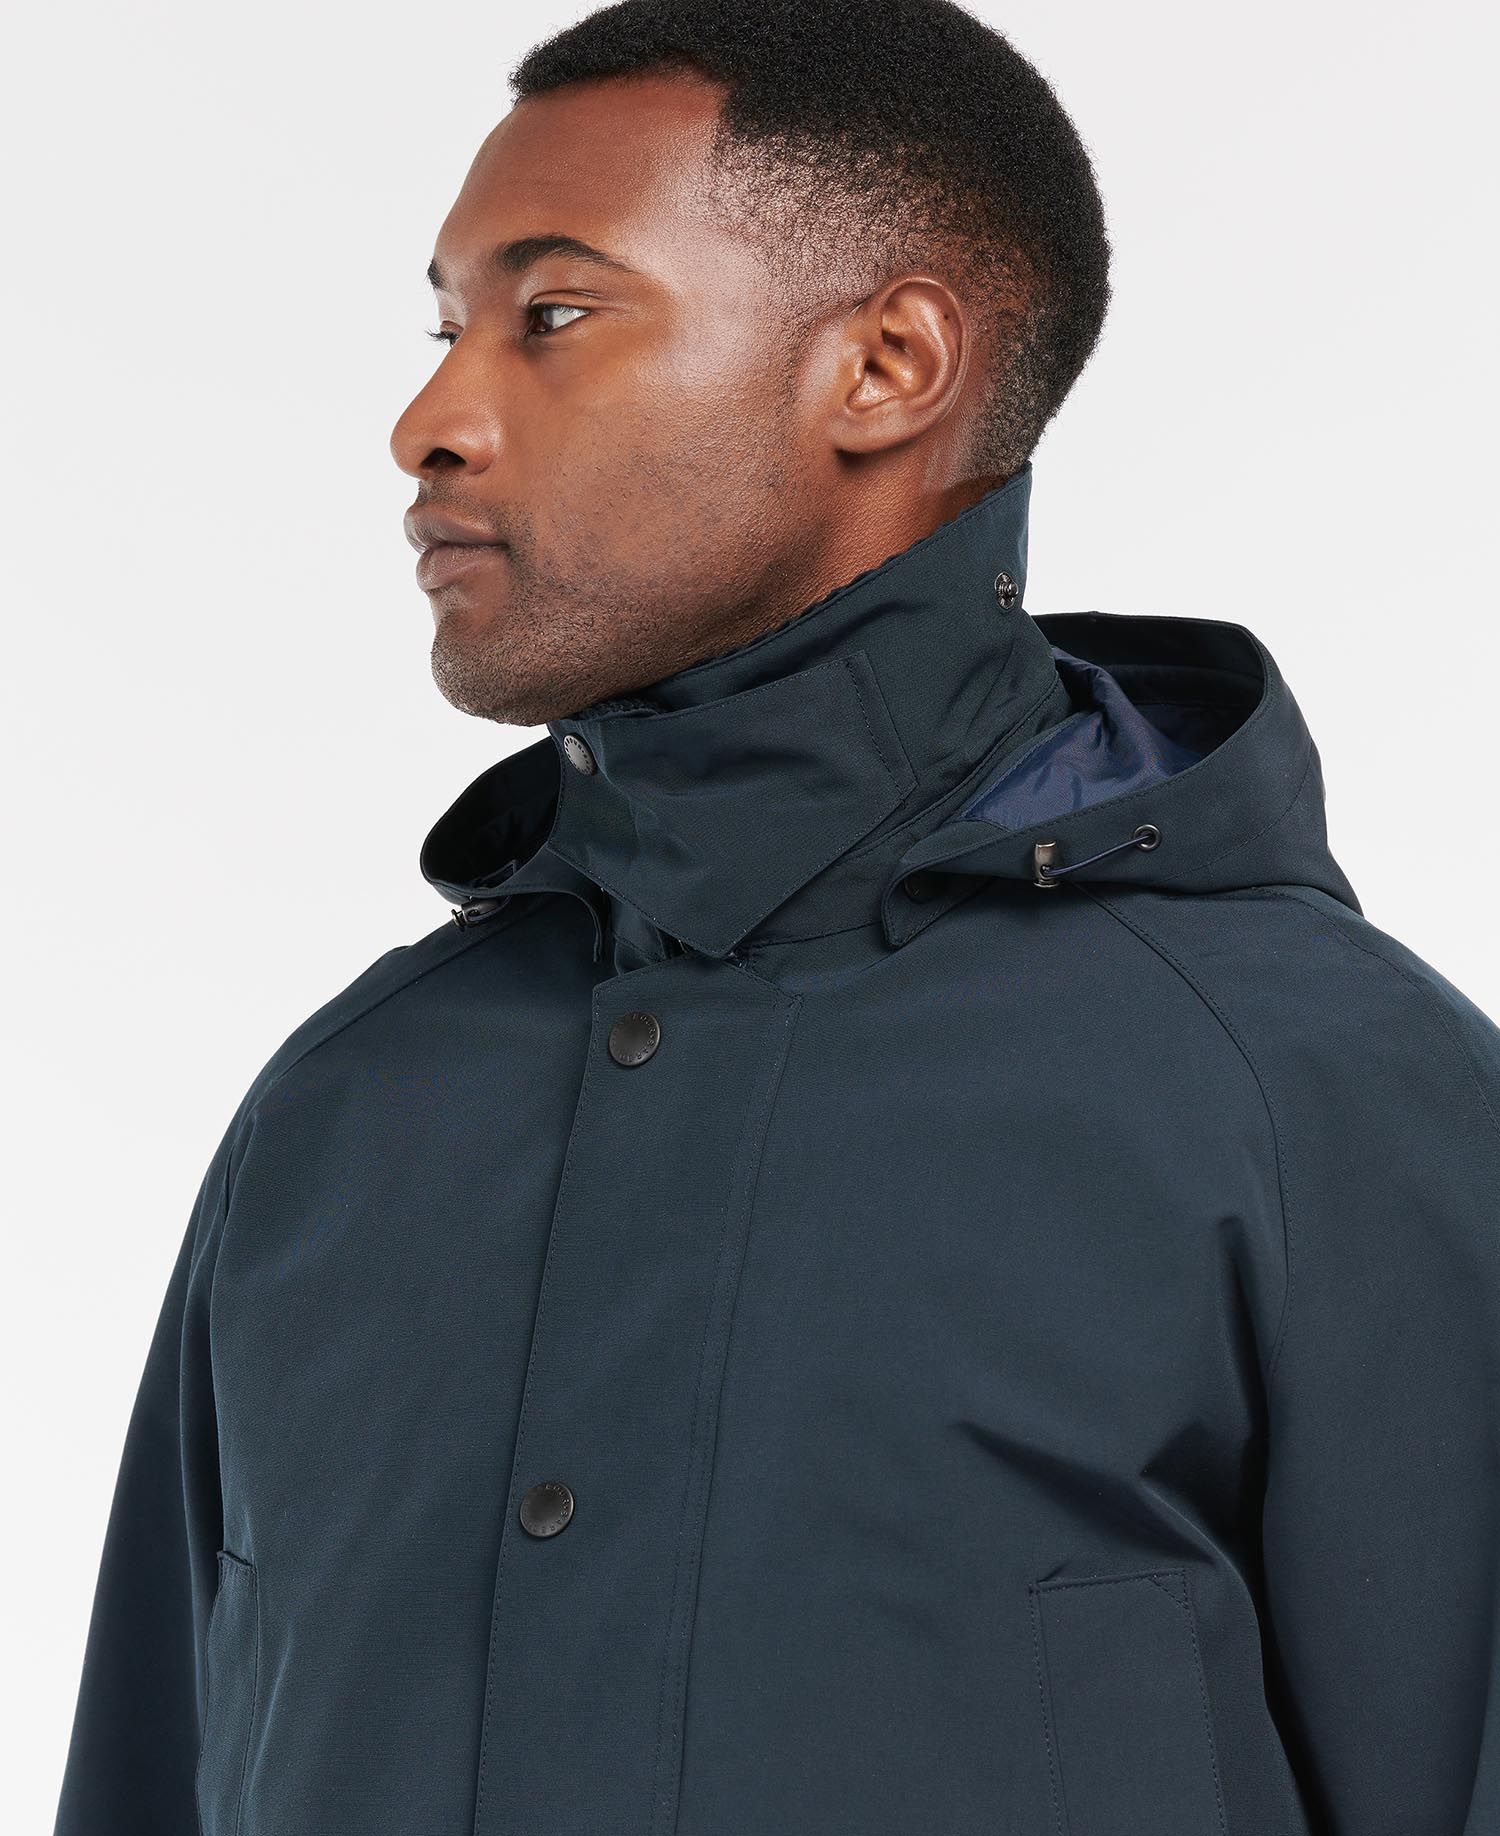 Shop the Barbour Waterproof Ashby Jacket in Navy | Barbour